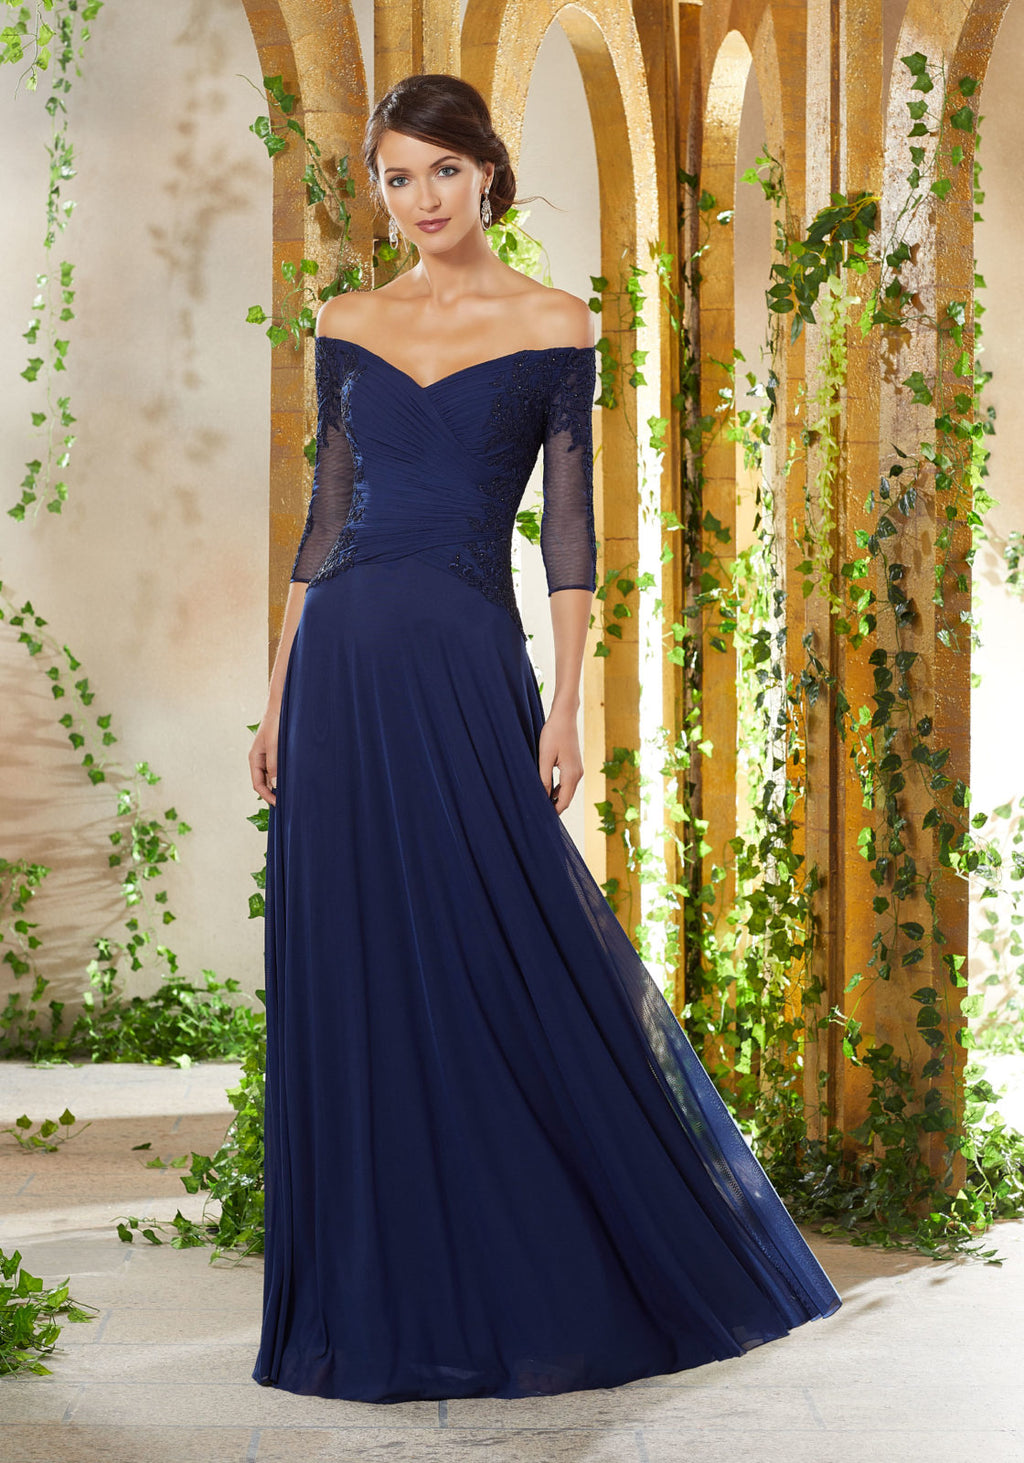 Three-Quarter sleeve stretch mesh evening gown, with an off the shoulder bodice accented in beaded lace appliqués.  Sizes: 2-24  Available in Navy, Rose  If we do not have your desired size or color in stock please call or email us for availability!